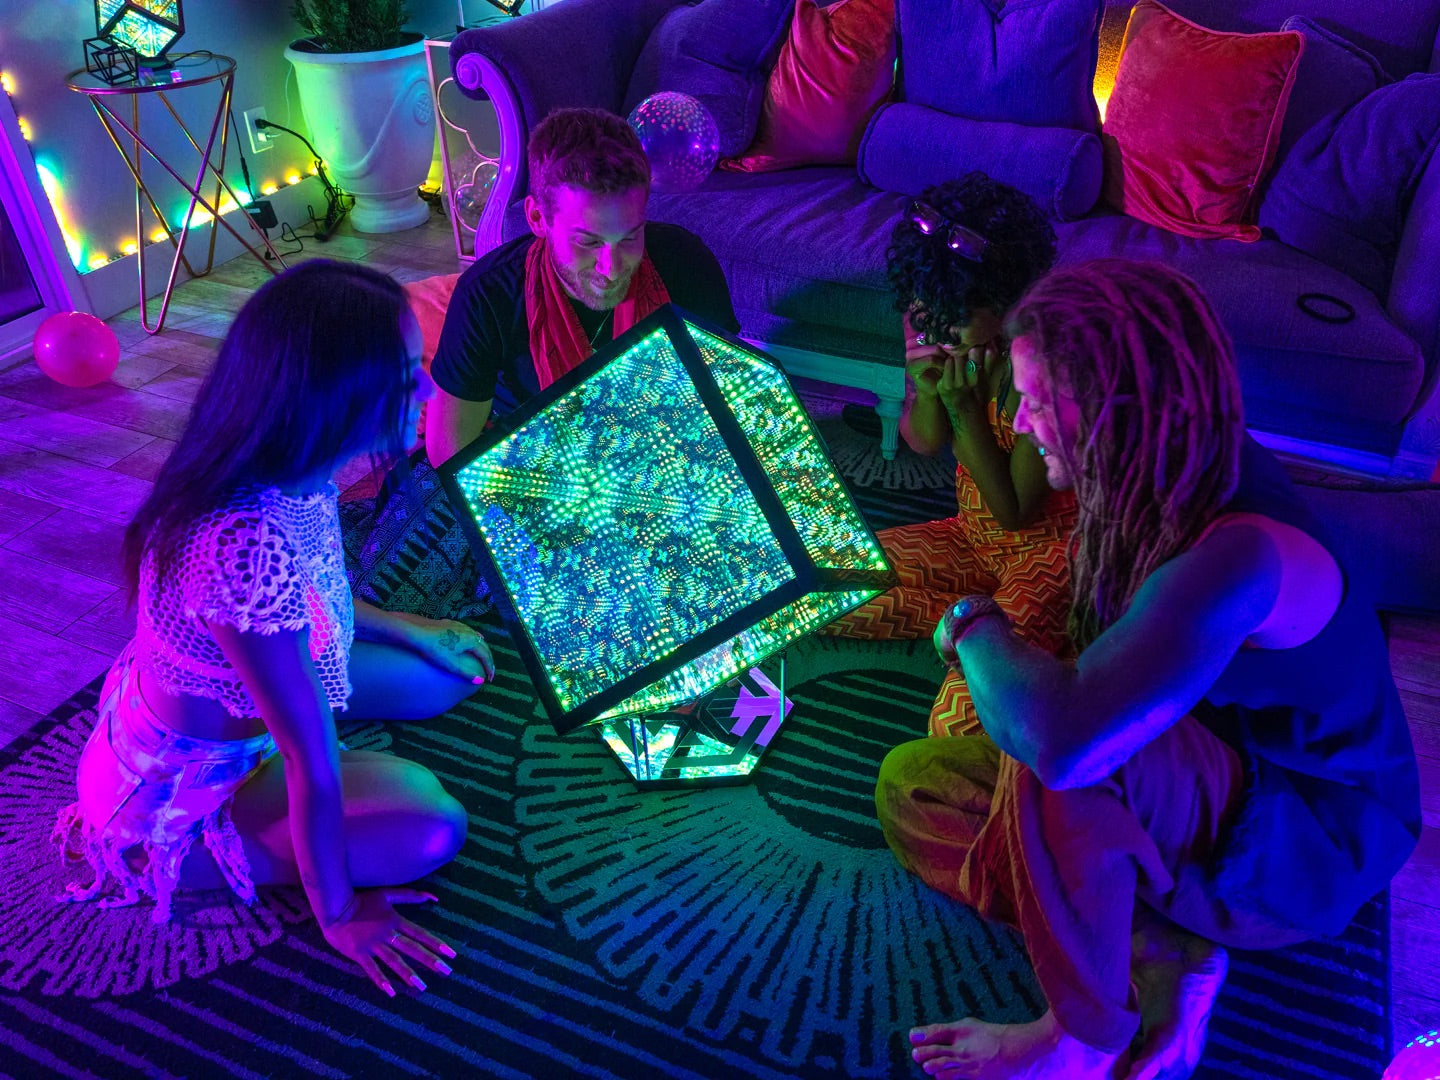 Friends sitting on floor, gathered around HyperCube that is decorative lighting for living room